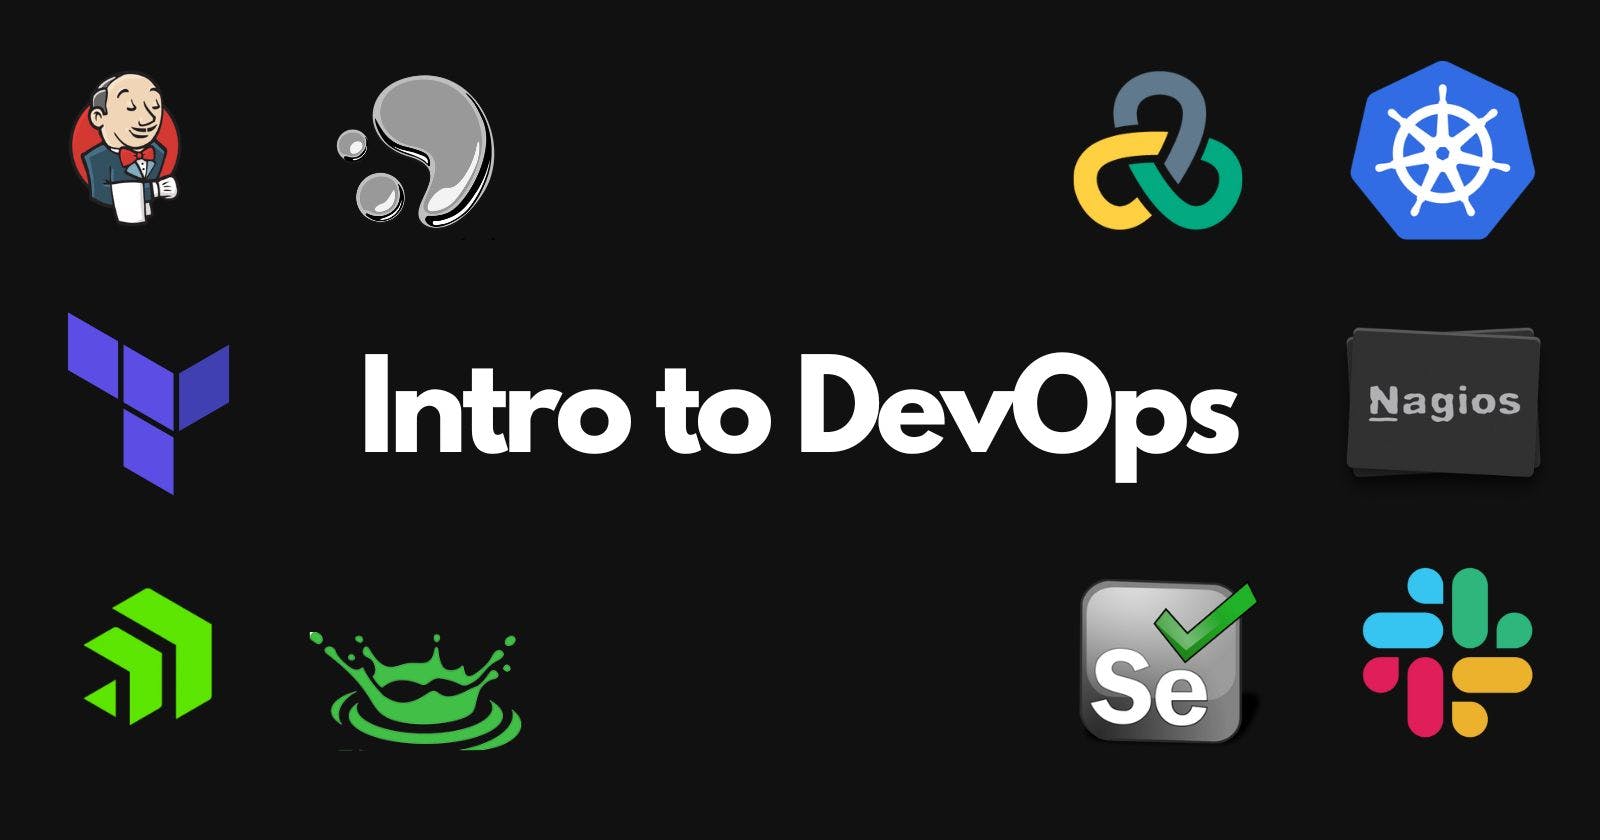 Introduction to DevOps and its Benefits